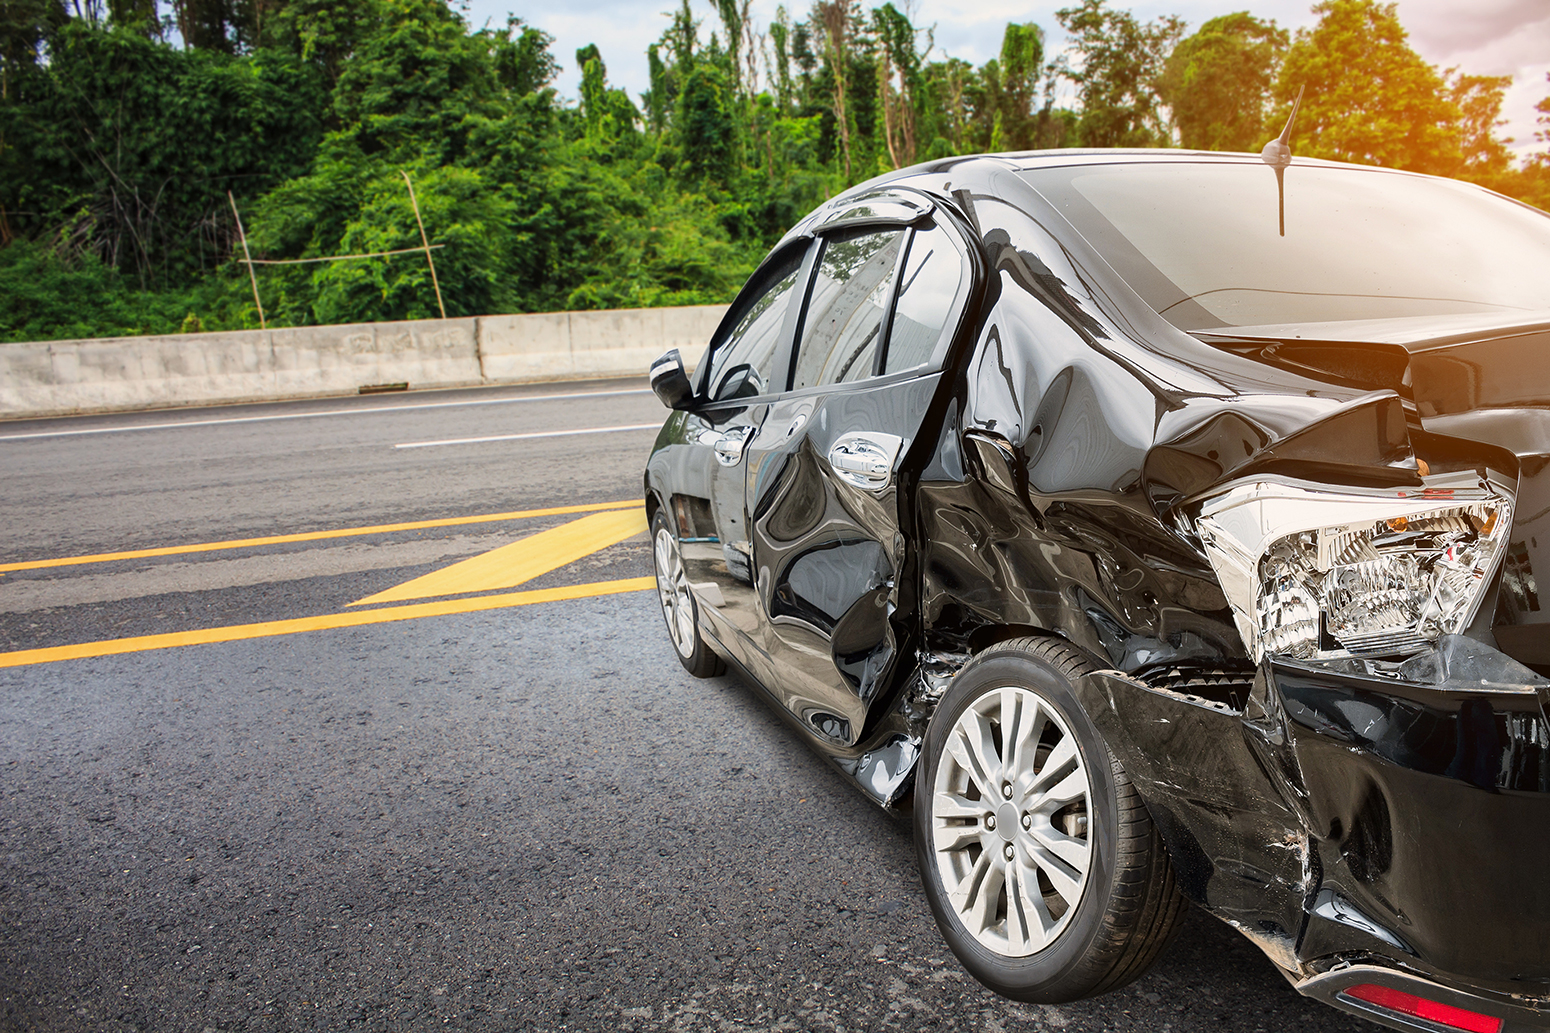 What Causes Car Accidents in Ulster, Orange and Dutchess County?